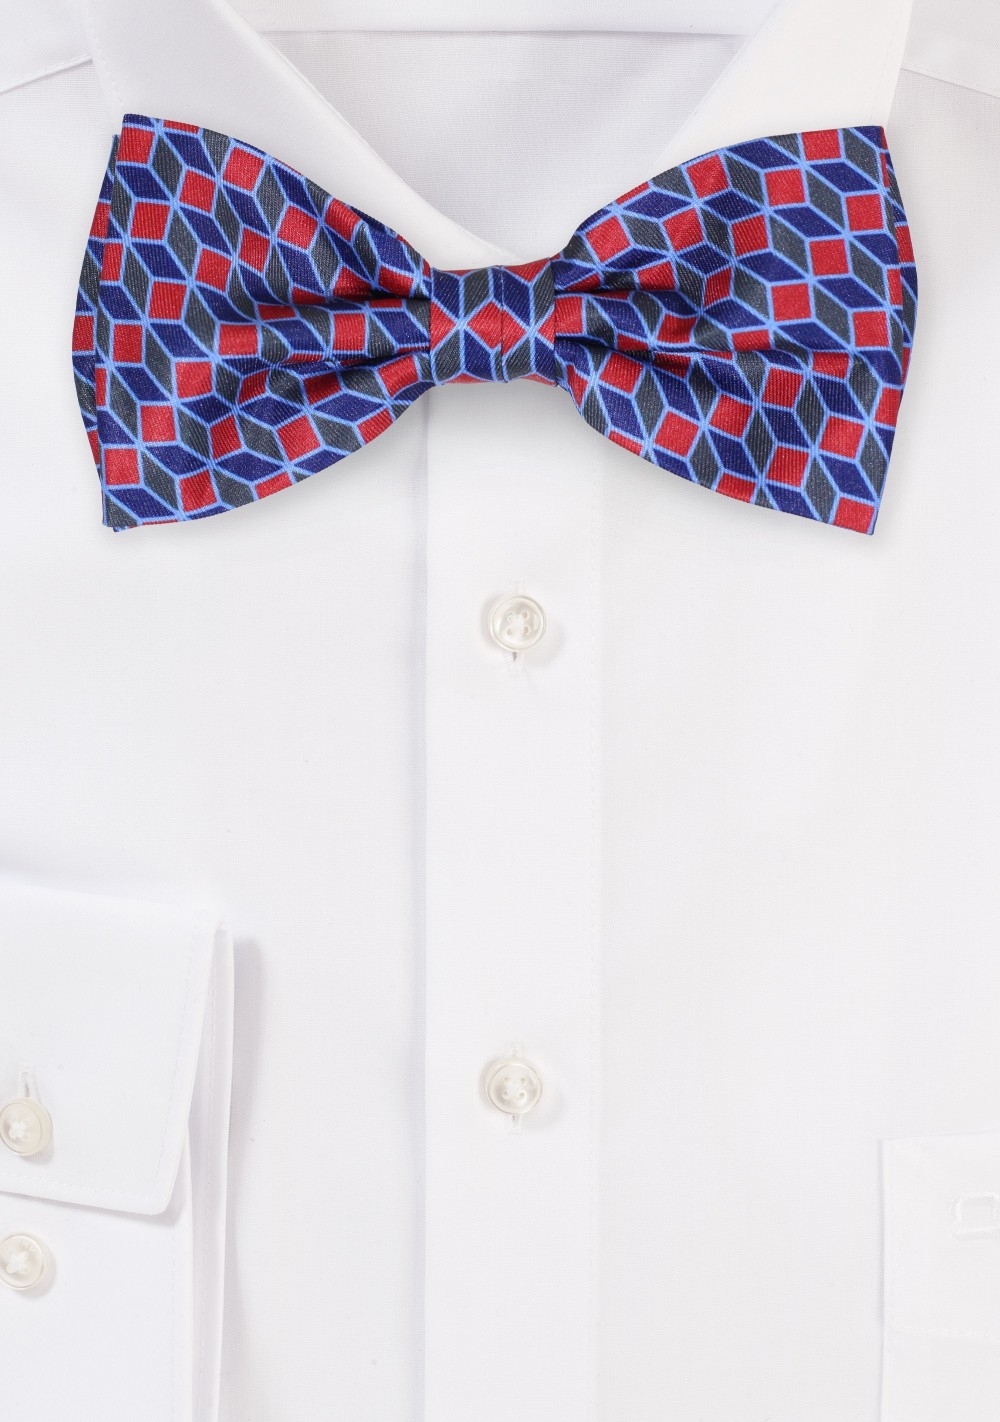 Designer Check Print Bow Tie Blues and Reds